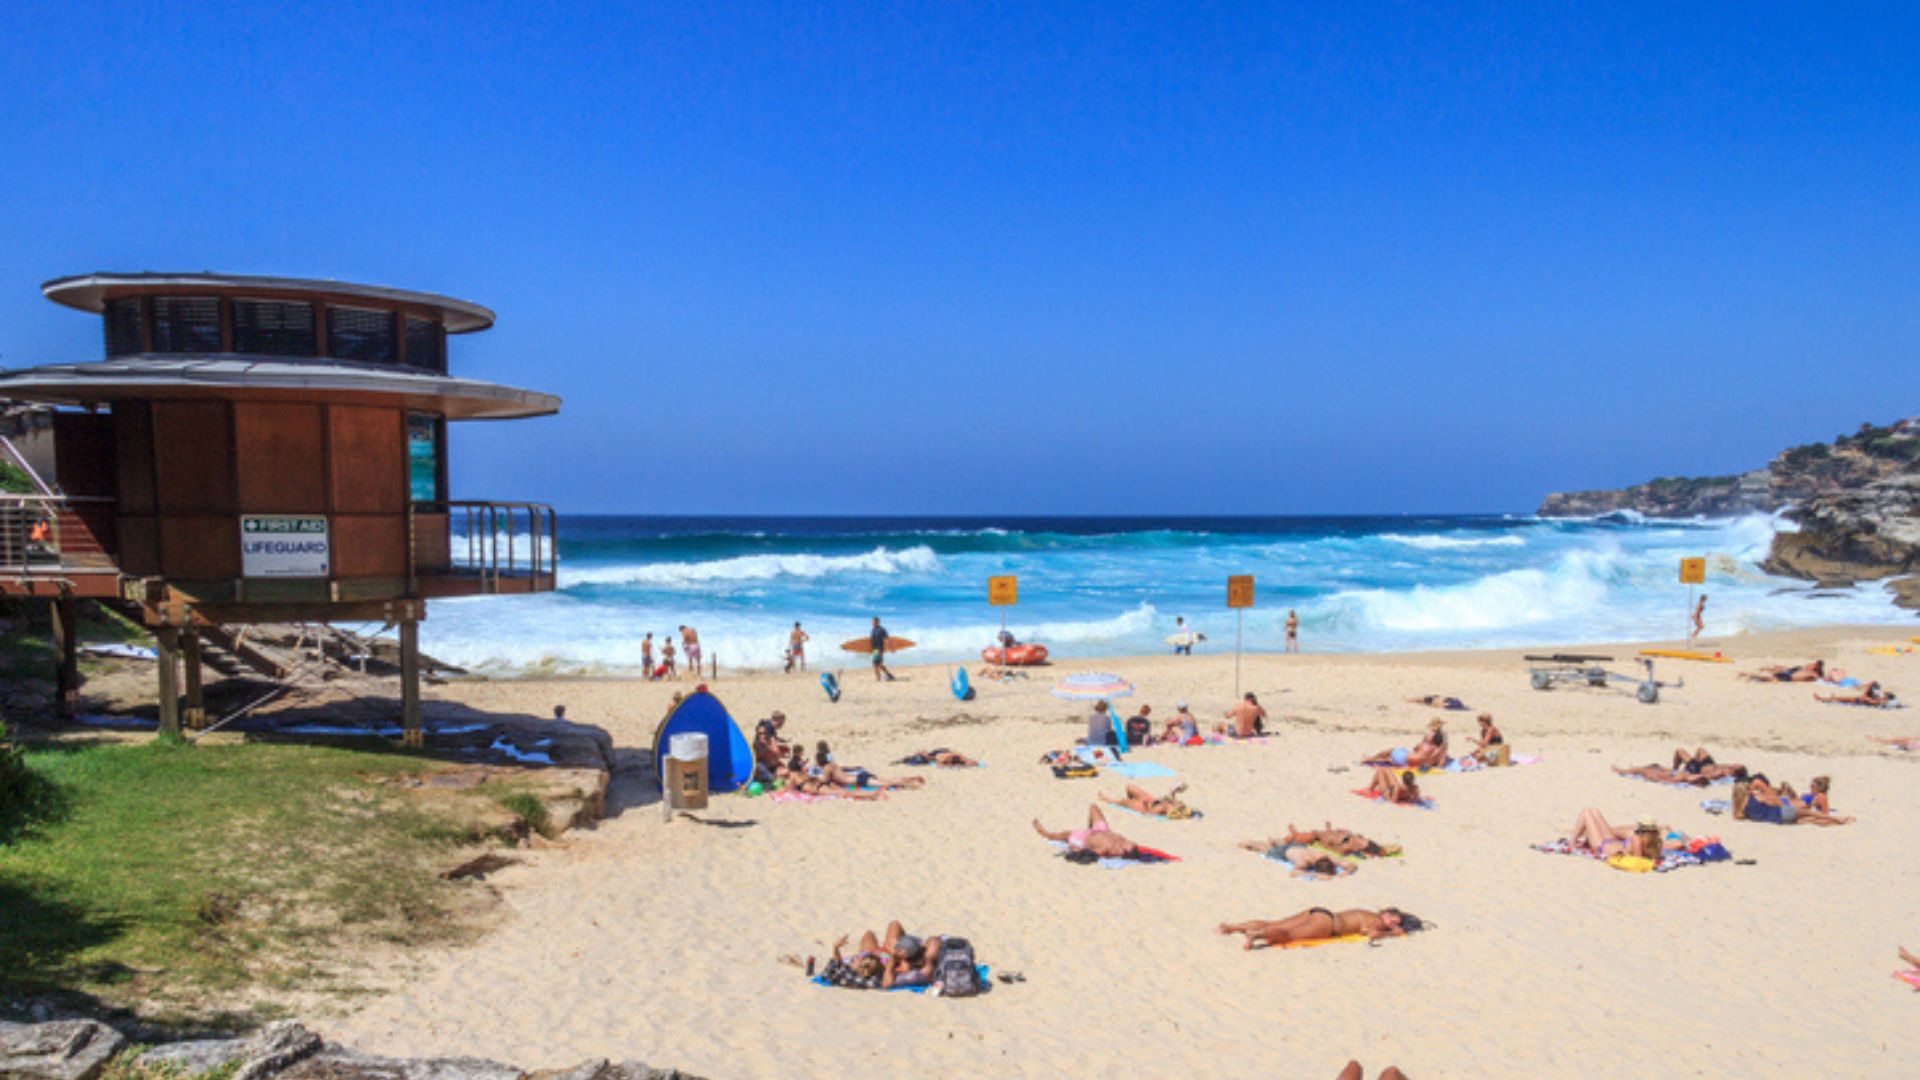 Tamarama Beach is the perfect destination for experienced surfers